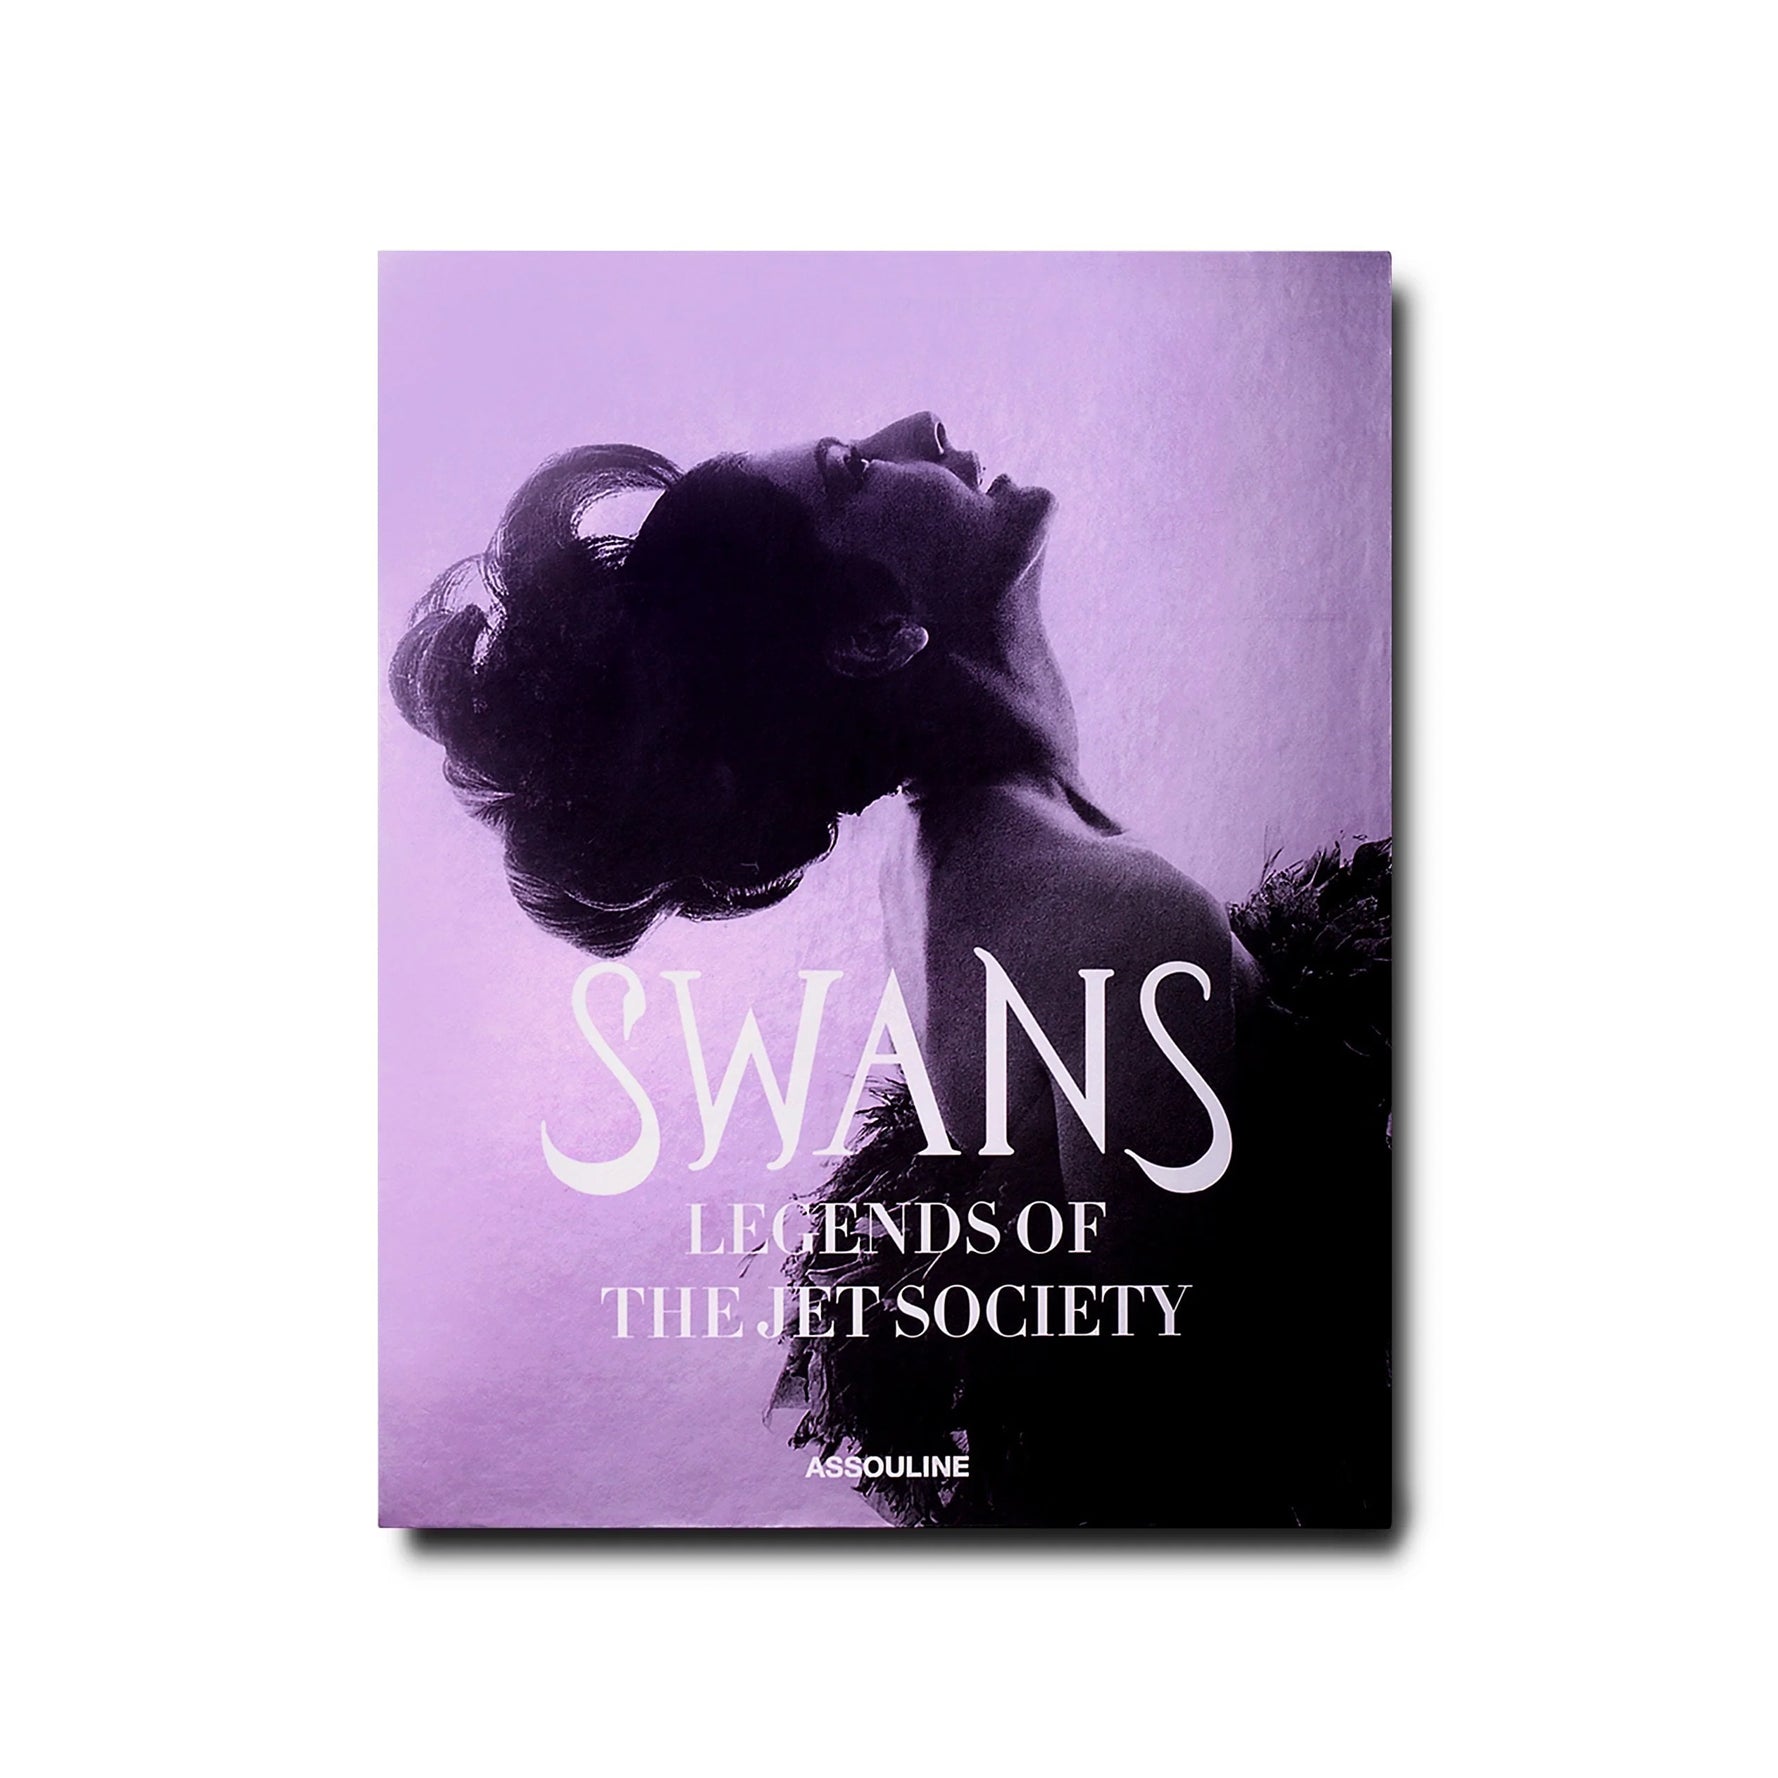 Swans: Legends of the Jet Society by Assouline